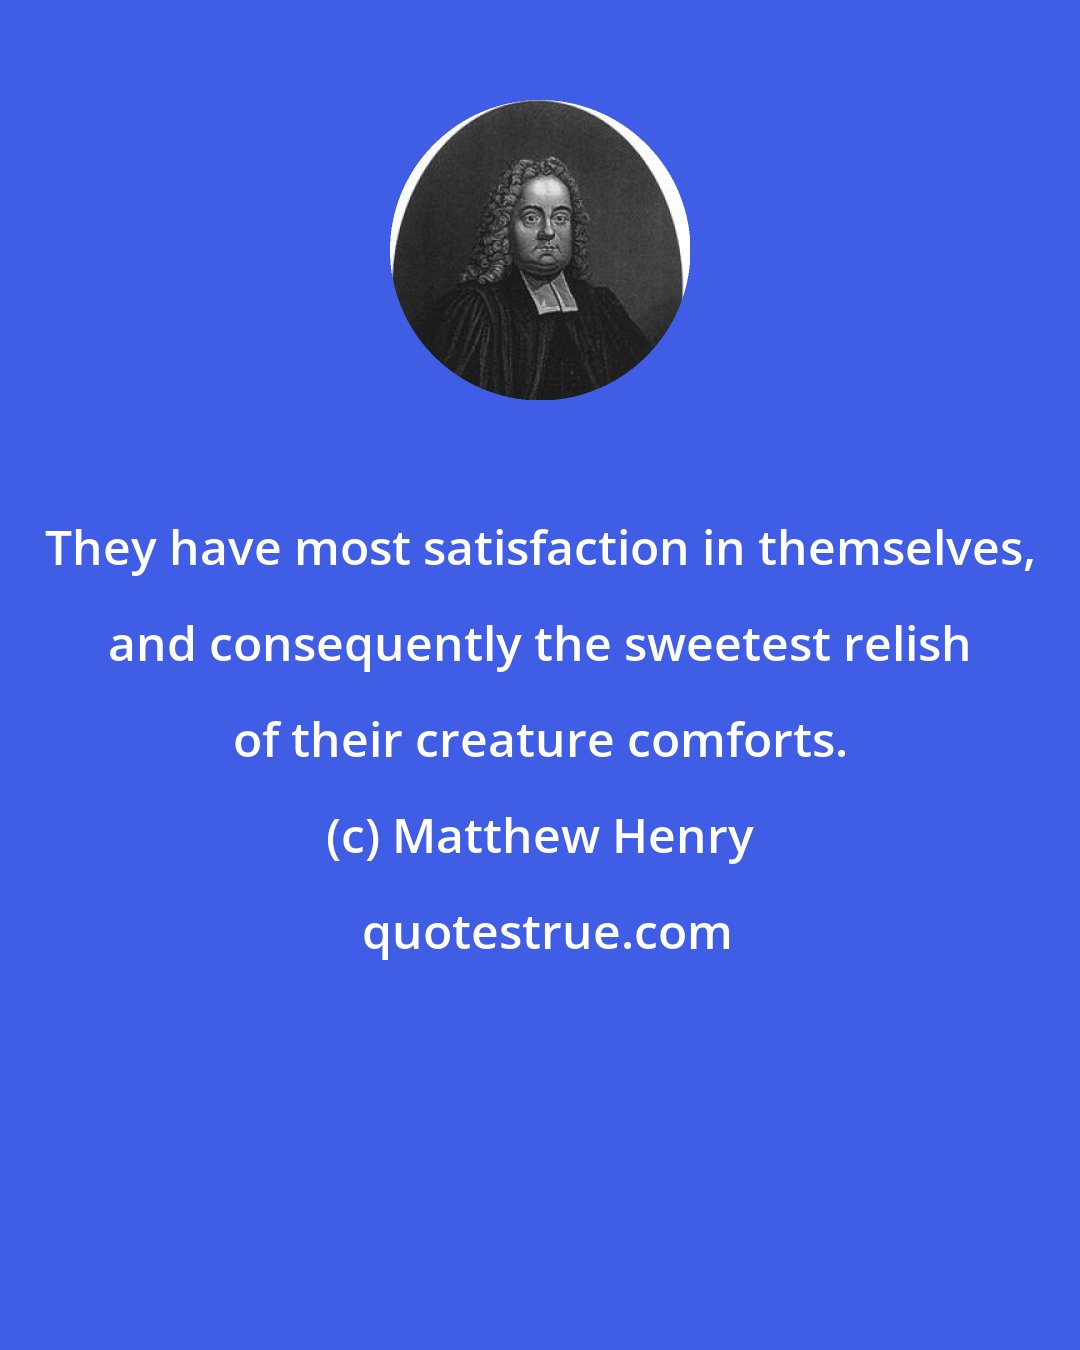 Matthew Henry: They have most satisfaction in themselves, and consequently the sweetest relish of their creature comforts.